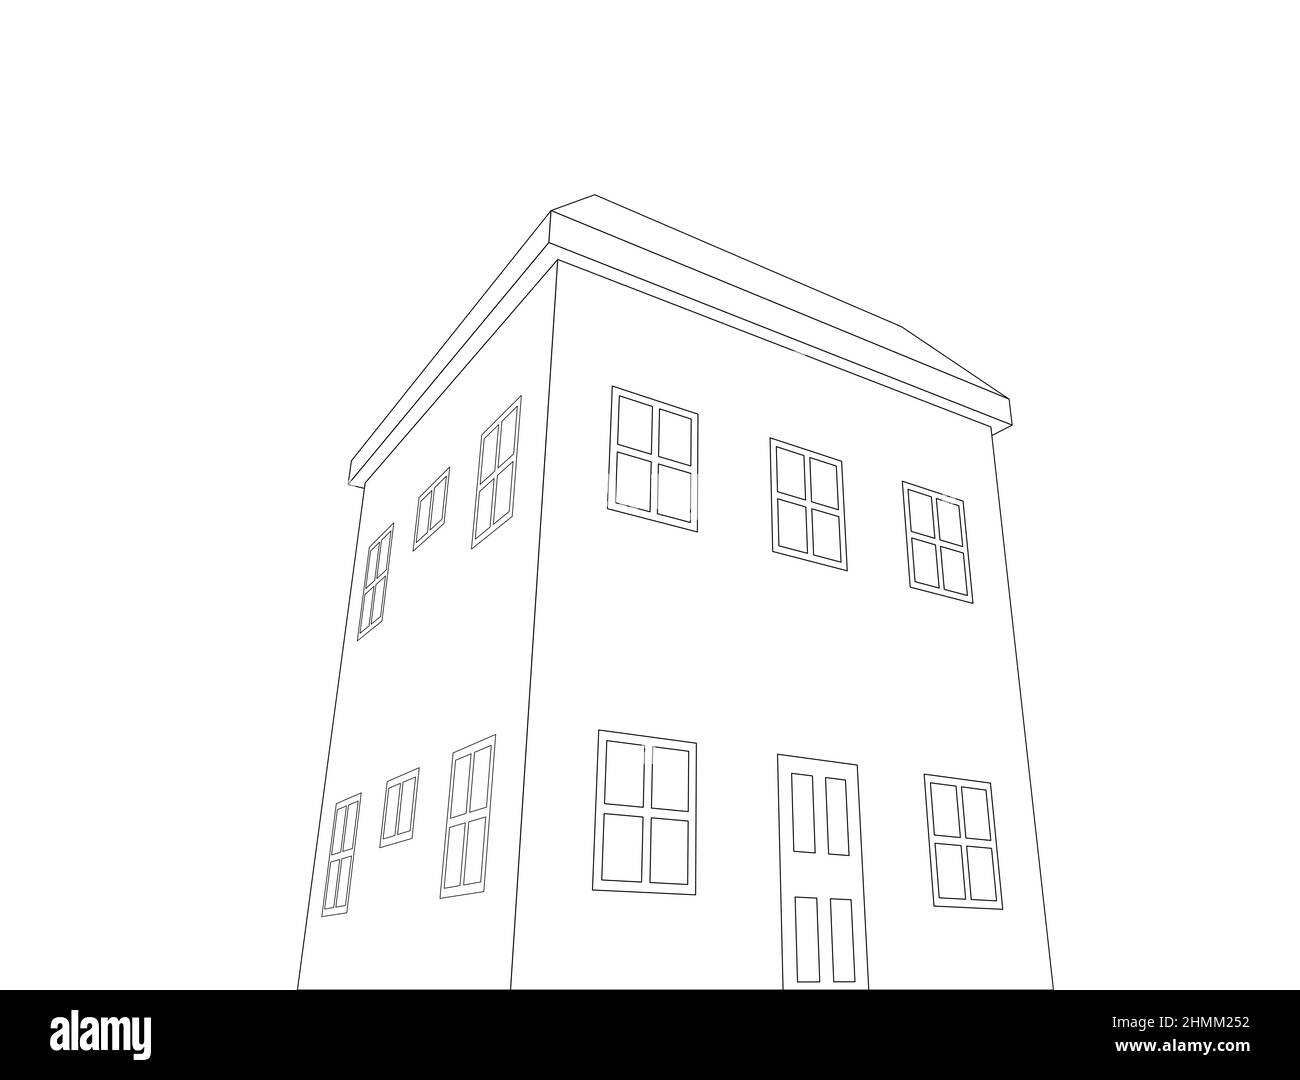 3d house line drawing, perspective view looking up Stock Photo